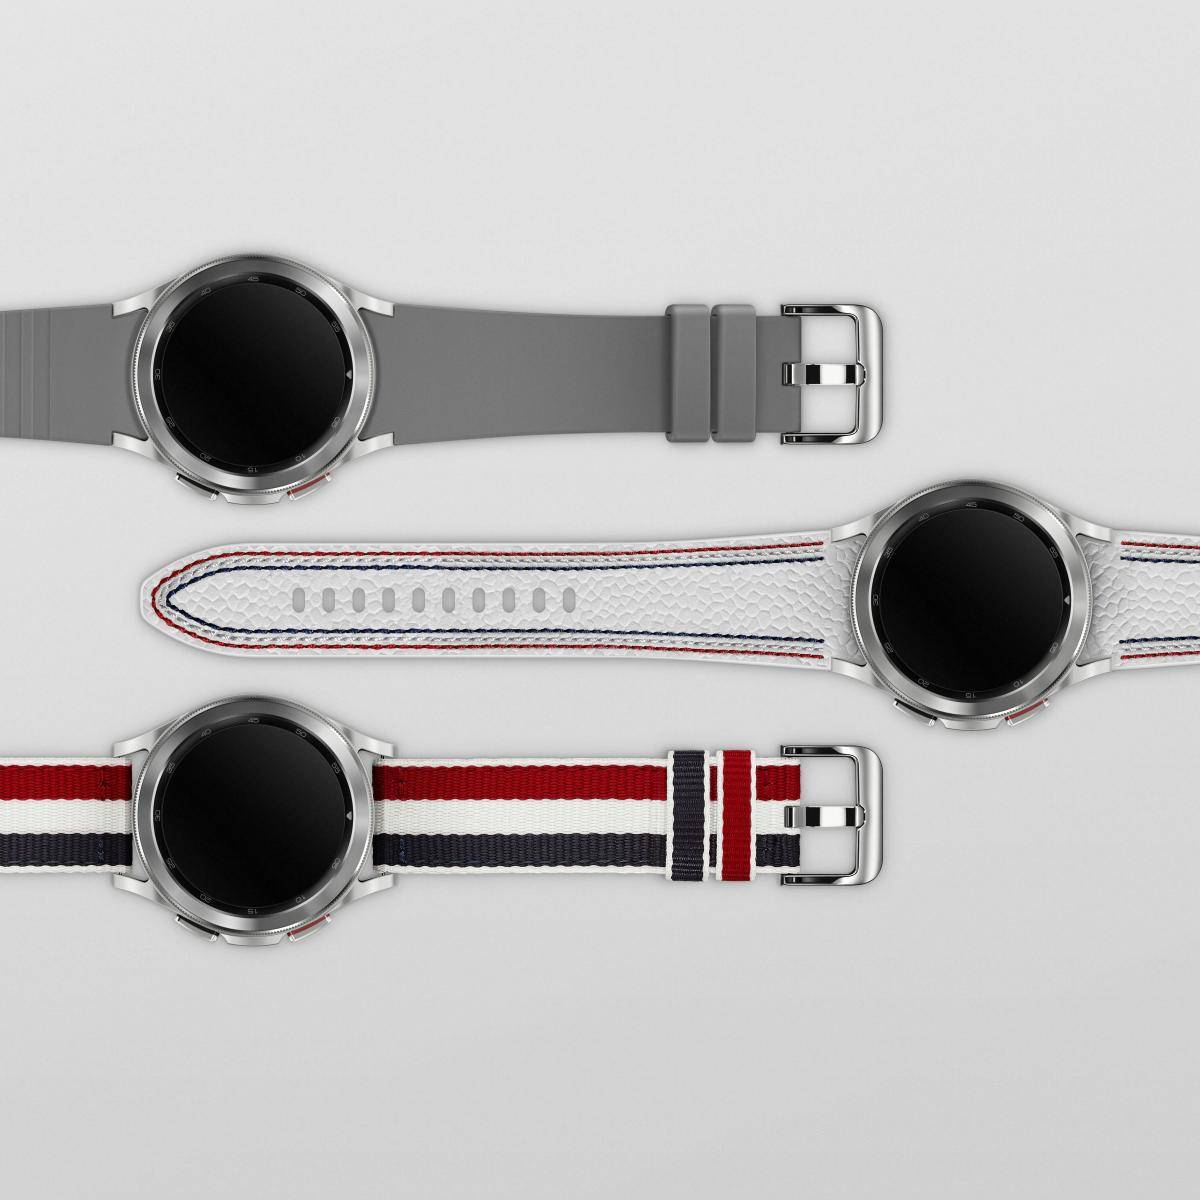 08_010_Thom Browne 3rd Edition_Watch4 Classic_Product_Family_1x1_RGB_210721_H